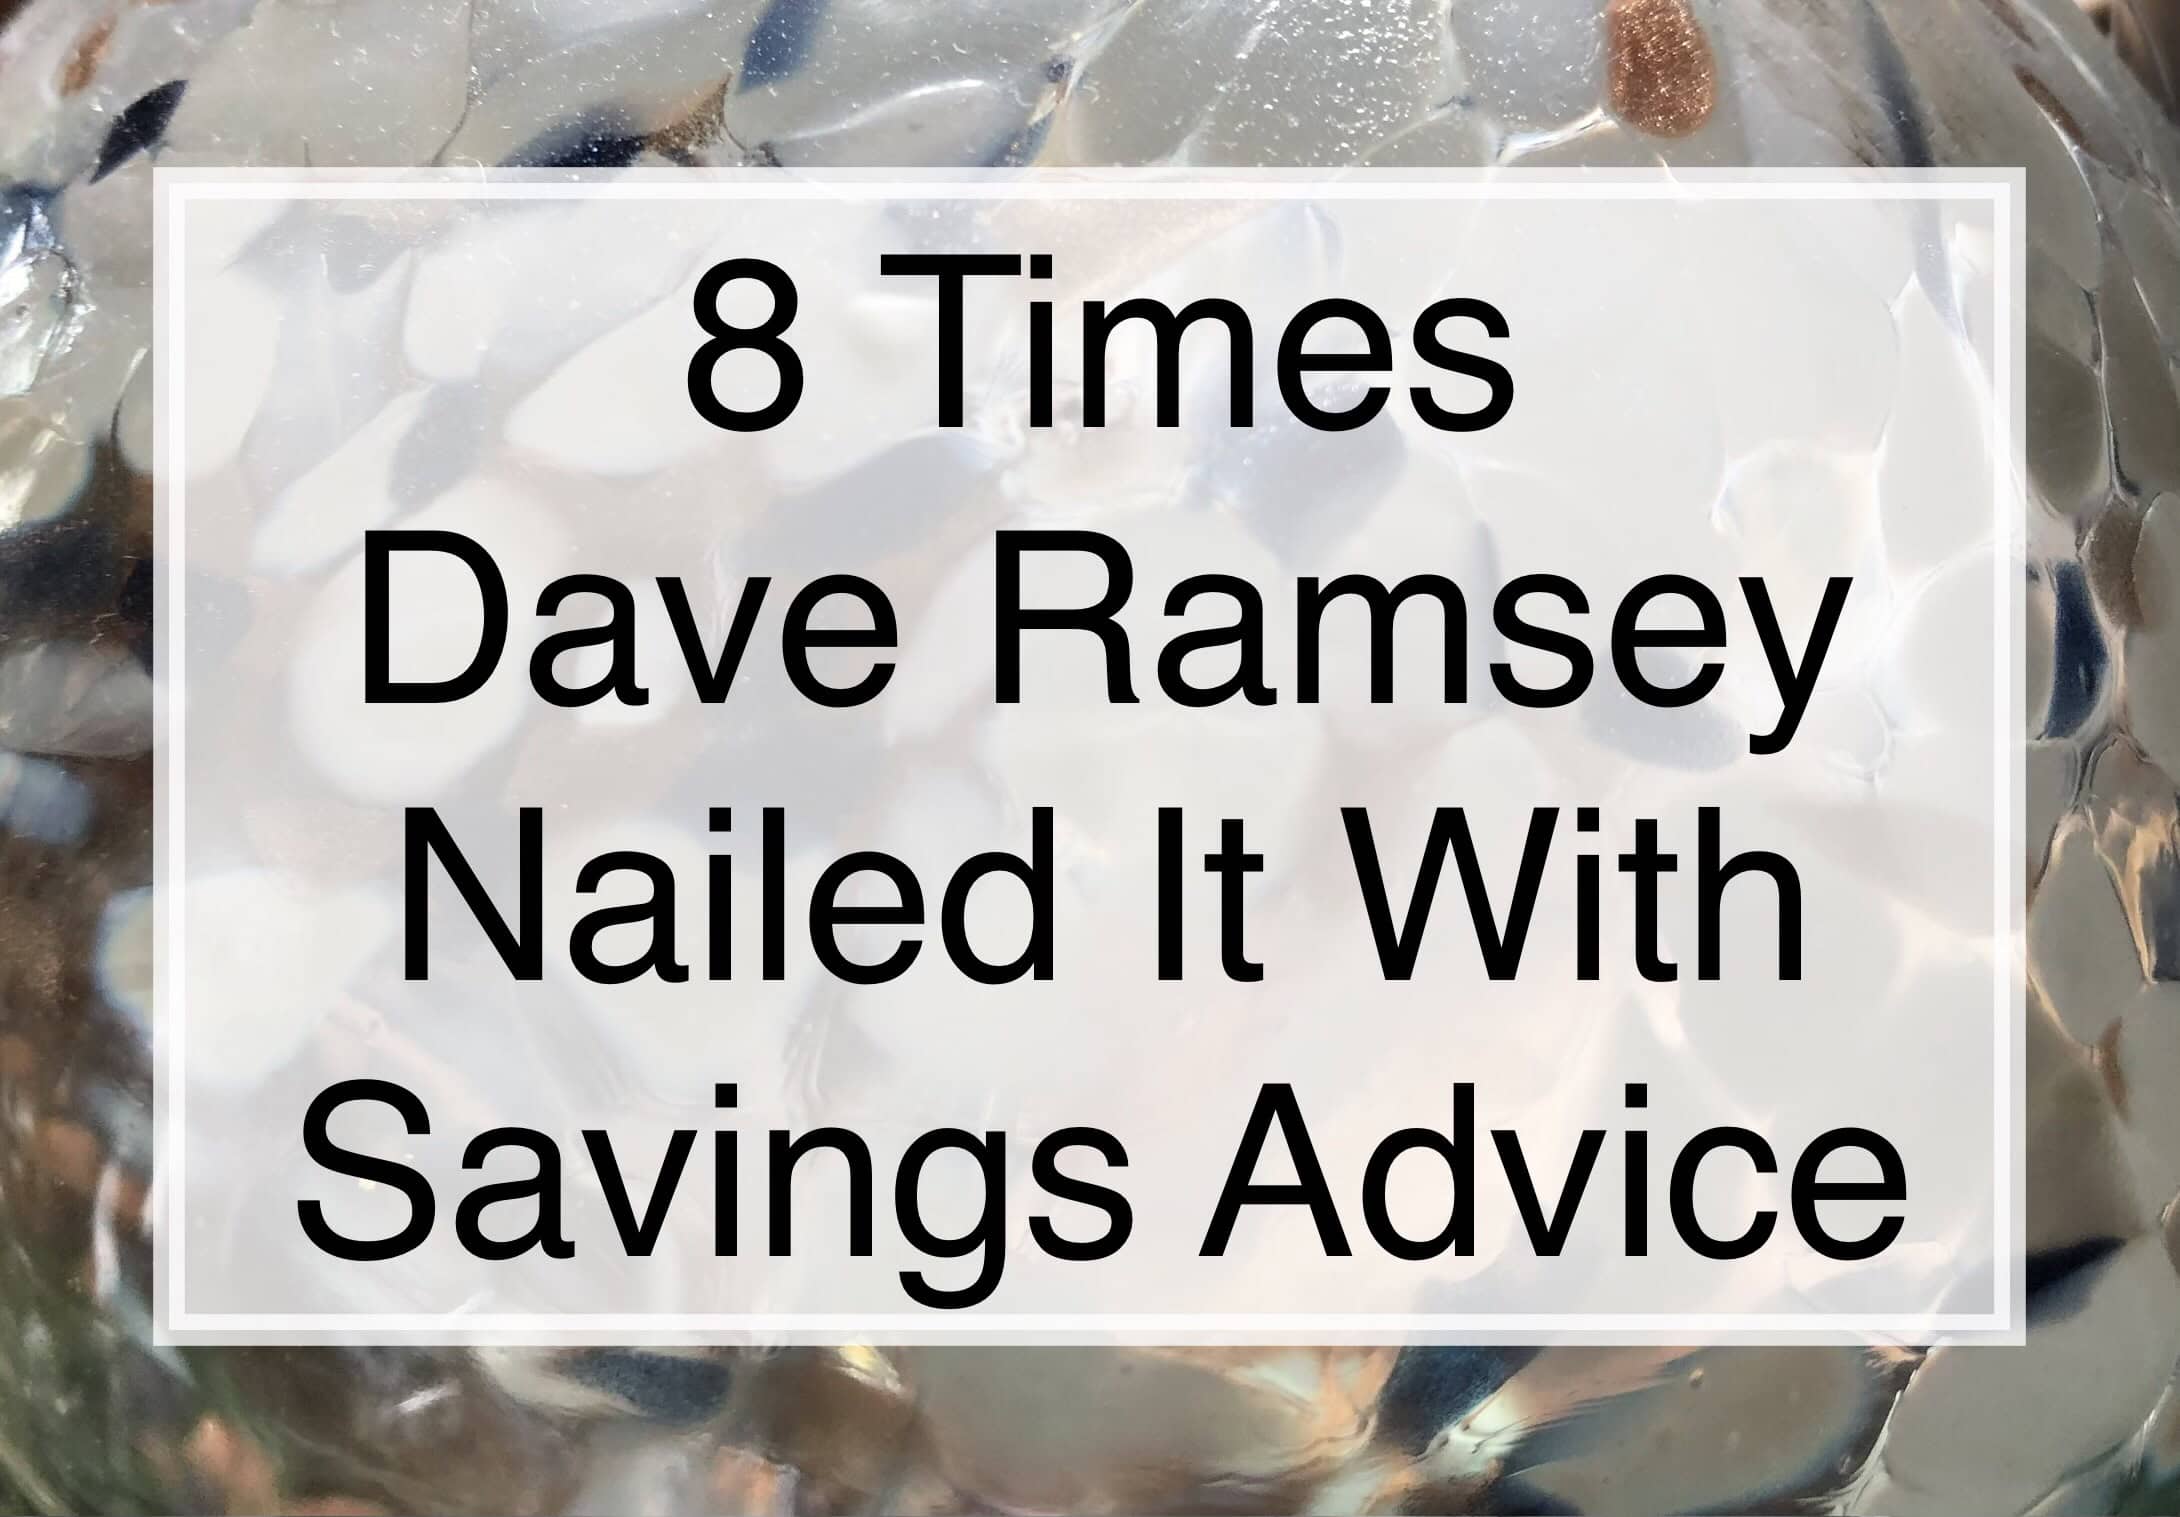 <p>Dave Ramsey is considered a 21st-century financial guru for his approach to personal finance. His advice is easy to understand, focusing on principles like living debt-free, budgeting, and saving for emergencies. Through Ramsey's radio show, books, and podcasts, his message of discipline in managing finances has reached millions of people. Ramsey's ability to simplify complex financial concepts and motivate people to take control of their finances makes him a favorite. After culling the internet, 24/7 Wall St. has created a list of the 8 times Dave Ramsey nailed it with savings advice. Continue reading to learn how to improve your financial outlook.</p> <div class='fwpPitch'><div> <h2><b>Sponsored: Want to Retire Early? Start Here</b></h2> <p>Want retirement to come a few years earlier than you’d planned? Or<a href="http://https://smartasset.com/retirement/find-a-financial-planner?utm_source=247wallst&utm_campaign=wall_retireearly&utm_content=desktop|8-times-dave-ramsey-nailed-it-with-savings-advice|1388576&utm_term=Microsoft&utm_medium=eoaCTALinkDefault" rel="noopener nofollow sponsored">are you ready to retire now, but want an extra set of eyes on your finances?</a></p> <p>Now you can speak with up to 3 financial experts in your area for <strong>FREE</strong>. By simply <a href="http://https://smartasset.com/retirement/find-a-financial-planner?utm_source=247wallst&utm_campaign=wall_retireearly&utm_content=desktop|8-times-dave-ramsey-nailed-it-with-savings-advice|1388576&utm_term=Microsoft&utm_medium=eoaCTALinkDefault" rel="noopener nofollow sponsored">clicking here</a> you can begin to match with financial professionals who can help you build your plan to retire early. And the best part? The first conversation with them is free.</p> <p><a href="https://smartasset.com/retirement/find-a-financial-planner?utm_source=247wallst&utm_campaign=wall_retireearly&utm_content=desktop|8-times-dave-ramsey-nailed-it-with-savings-advice|1388576&utm_term=Microsoft&utm_medium=eoaCTALinkDefault" rel="noopener nofollow sponsored">Click here</a> to match with up to 3 financial pros who would be excited to help you make financial decisions.</p> </div>  </div><p>Agree with this? Hit the Thumbs Up button above. Disagree? Let us know in the comments with what you'd change.</p>